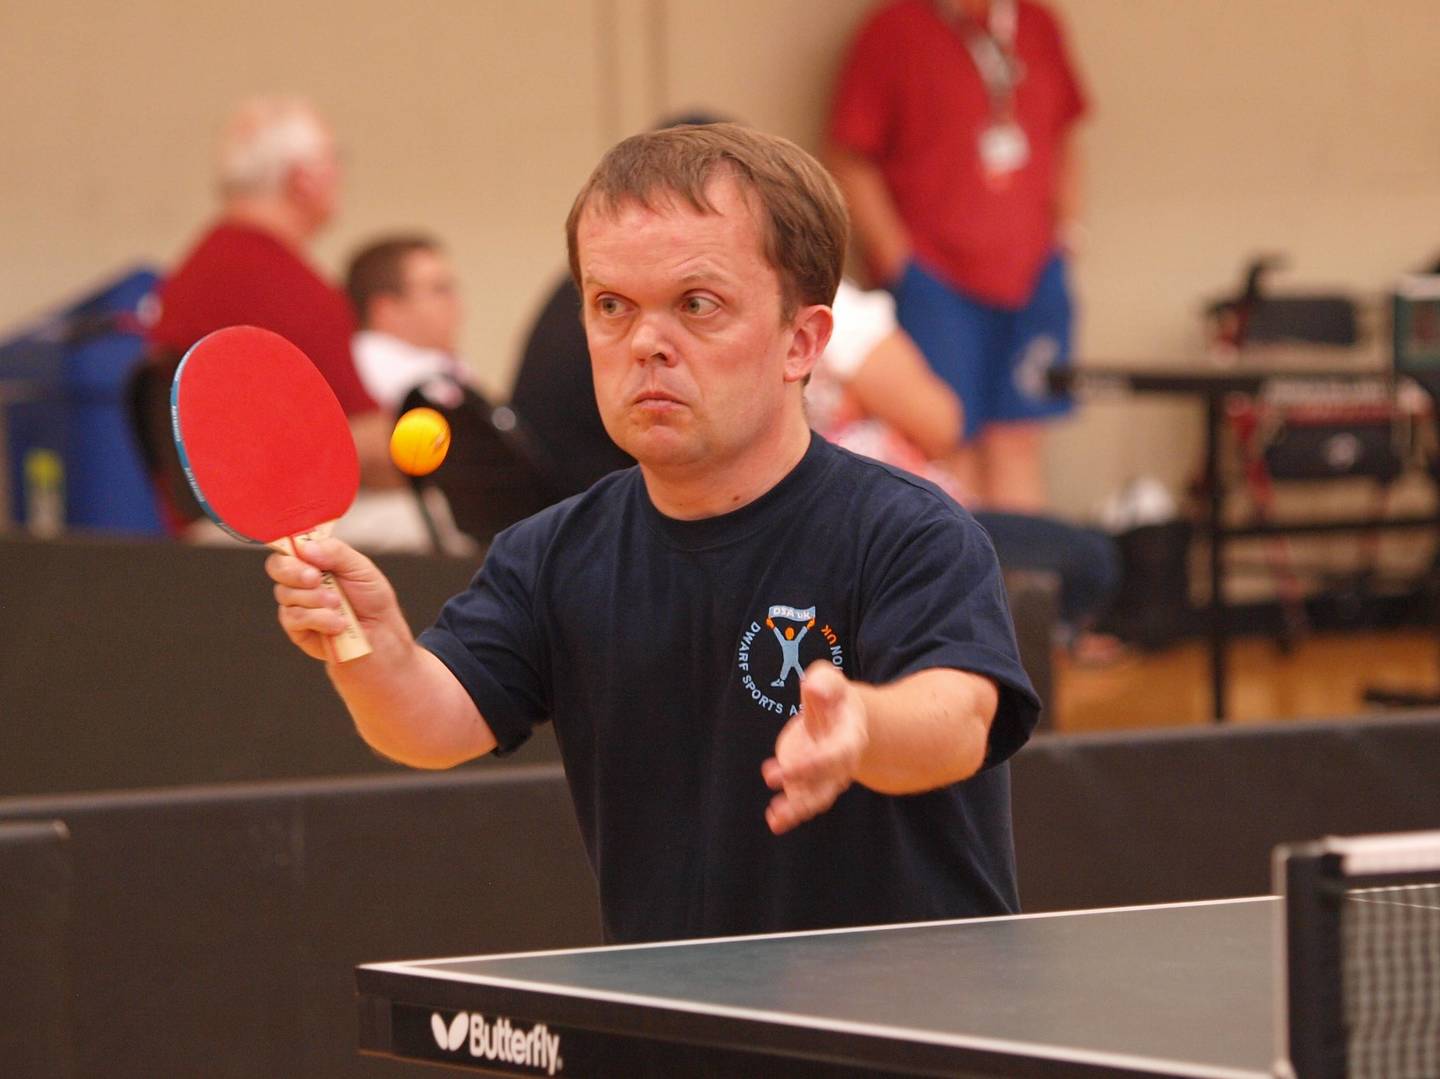 Man with dwarfism playing table tennis